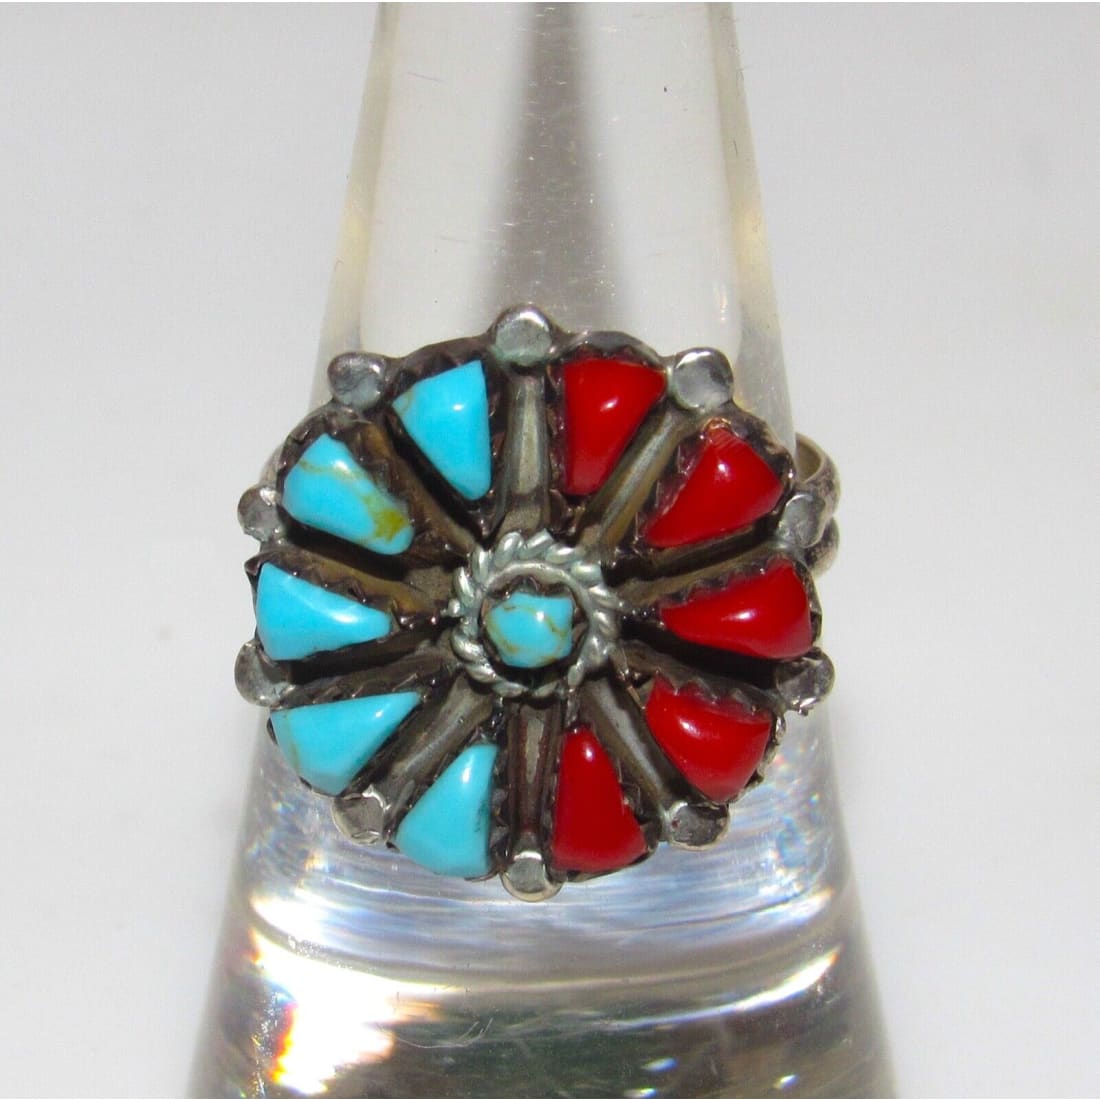 VTG Zuni Turquoise Coral Cluster Ring Size 7 Sterling Silver